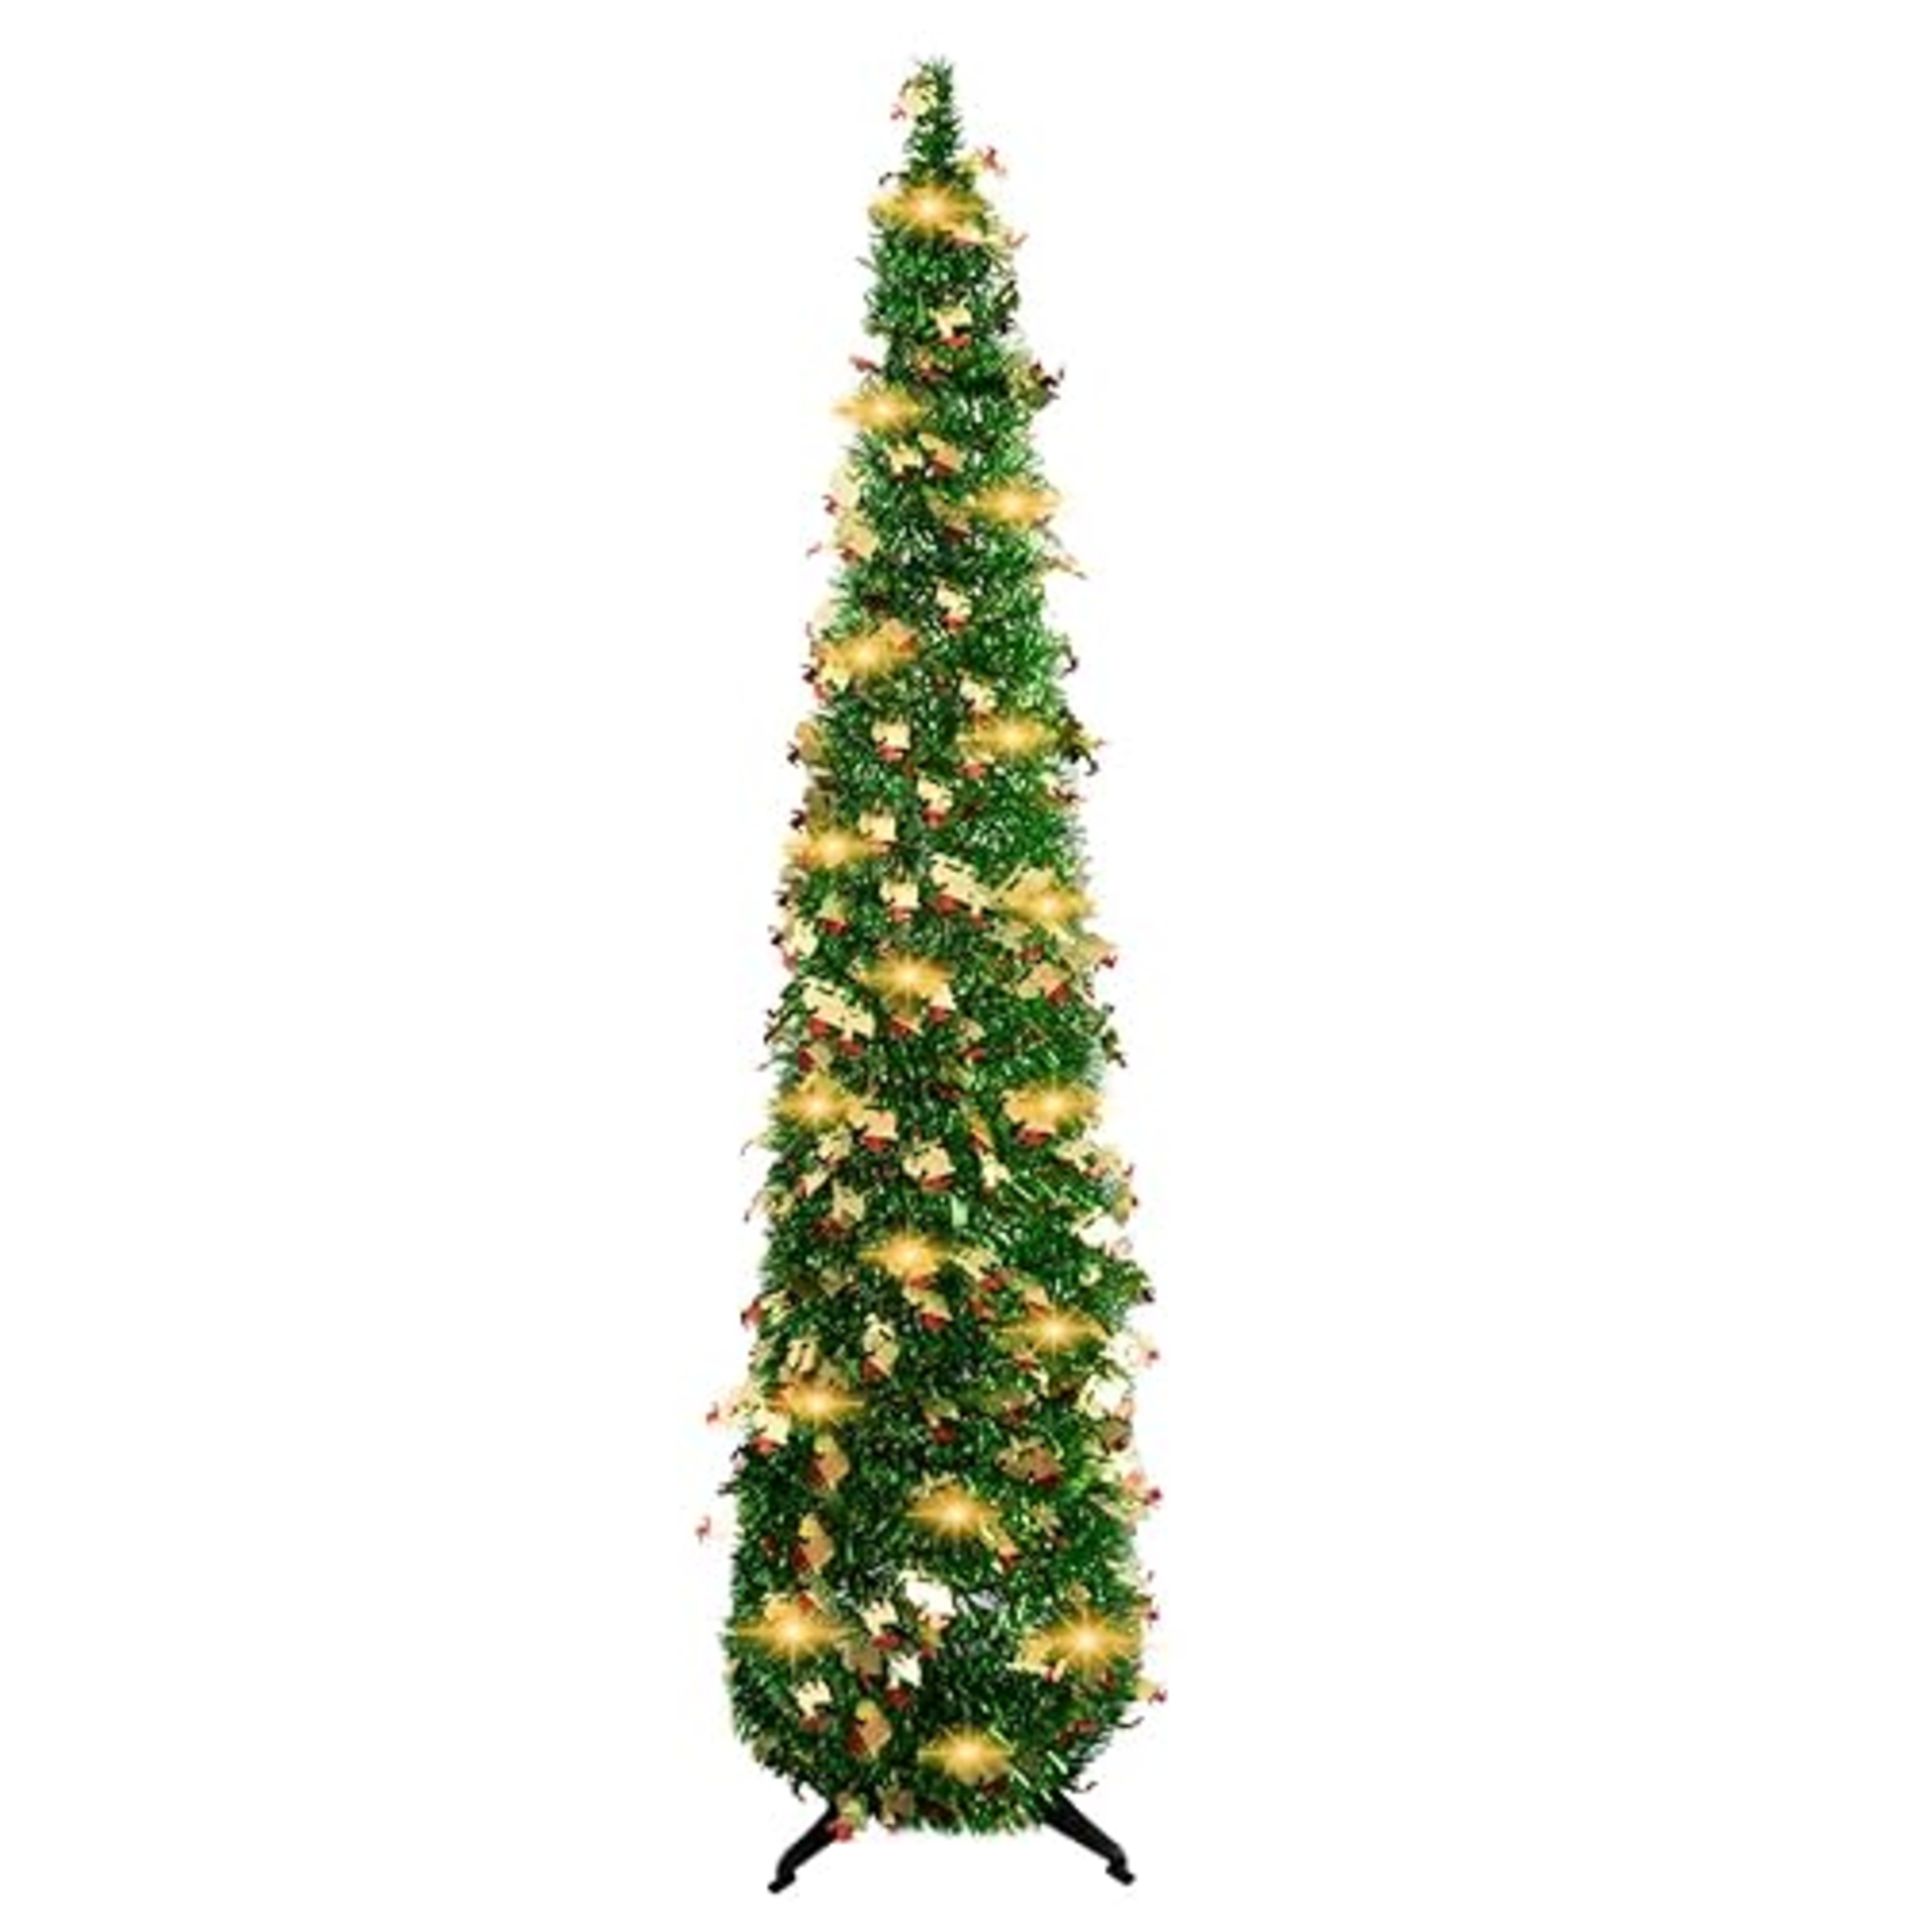 150Cm/5Ft Collapsible Artificial Xmas Tree, Pop Up Tinsel Christmas Tree With LED Lights, Tall Sk...